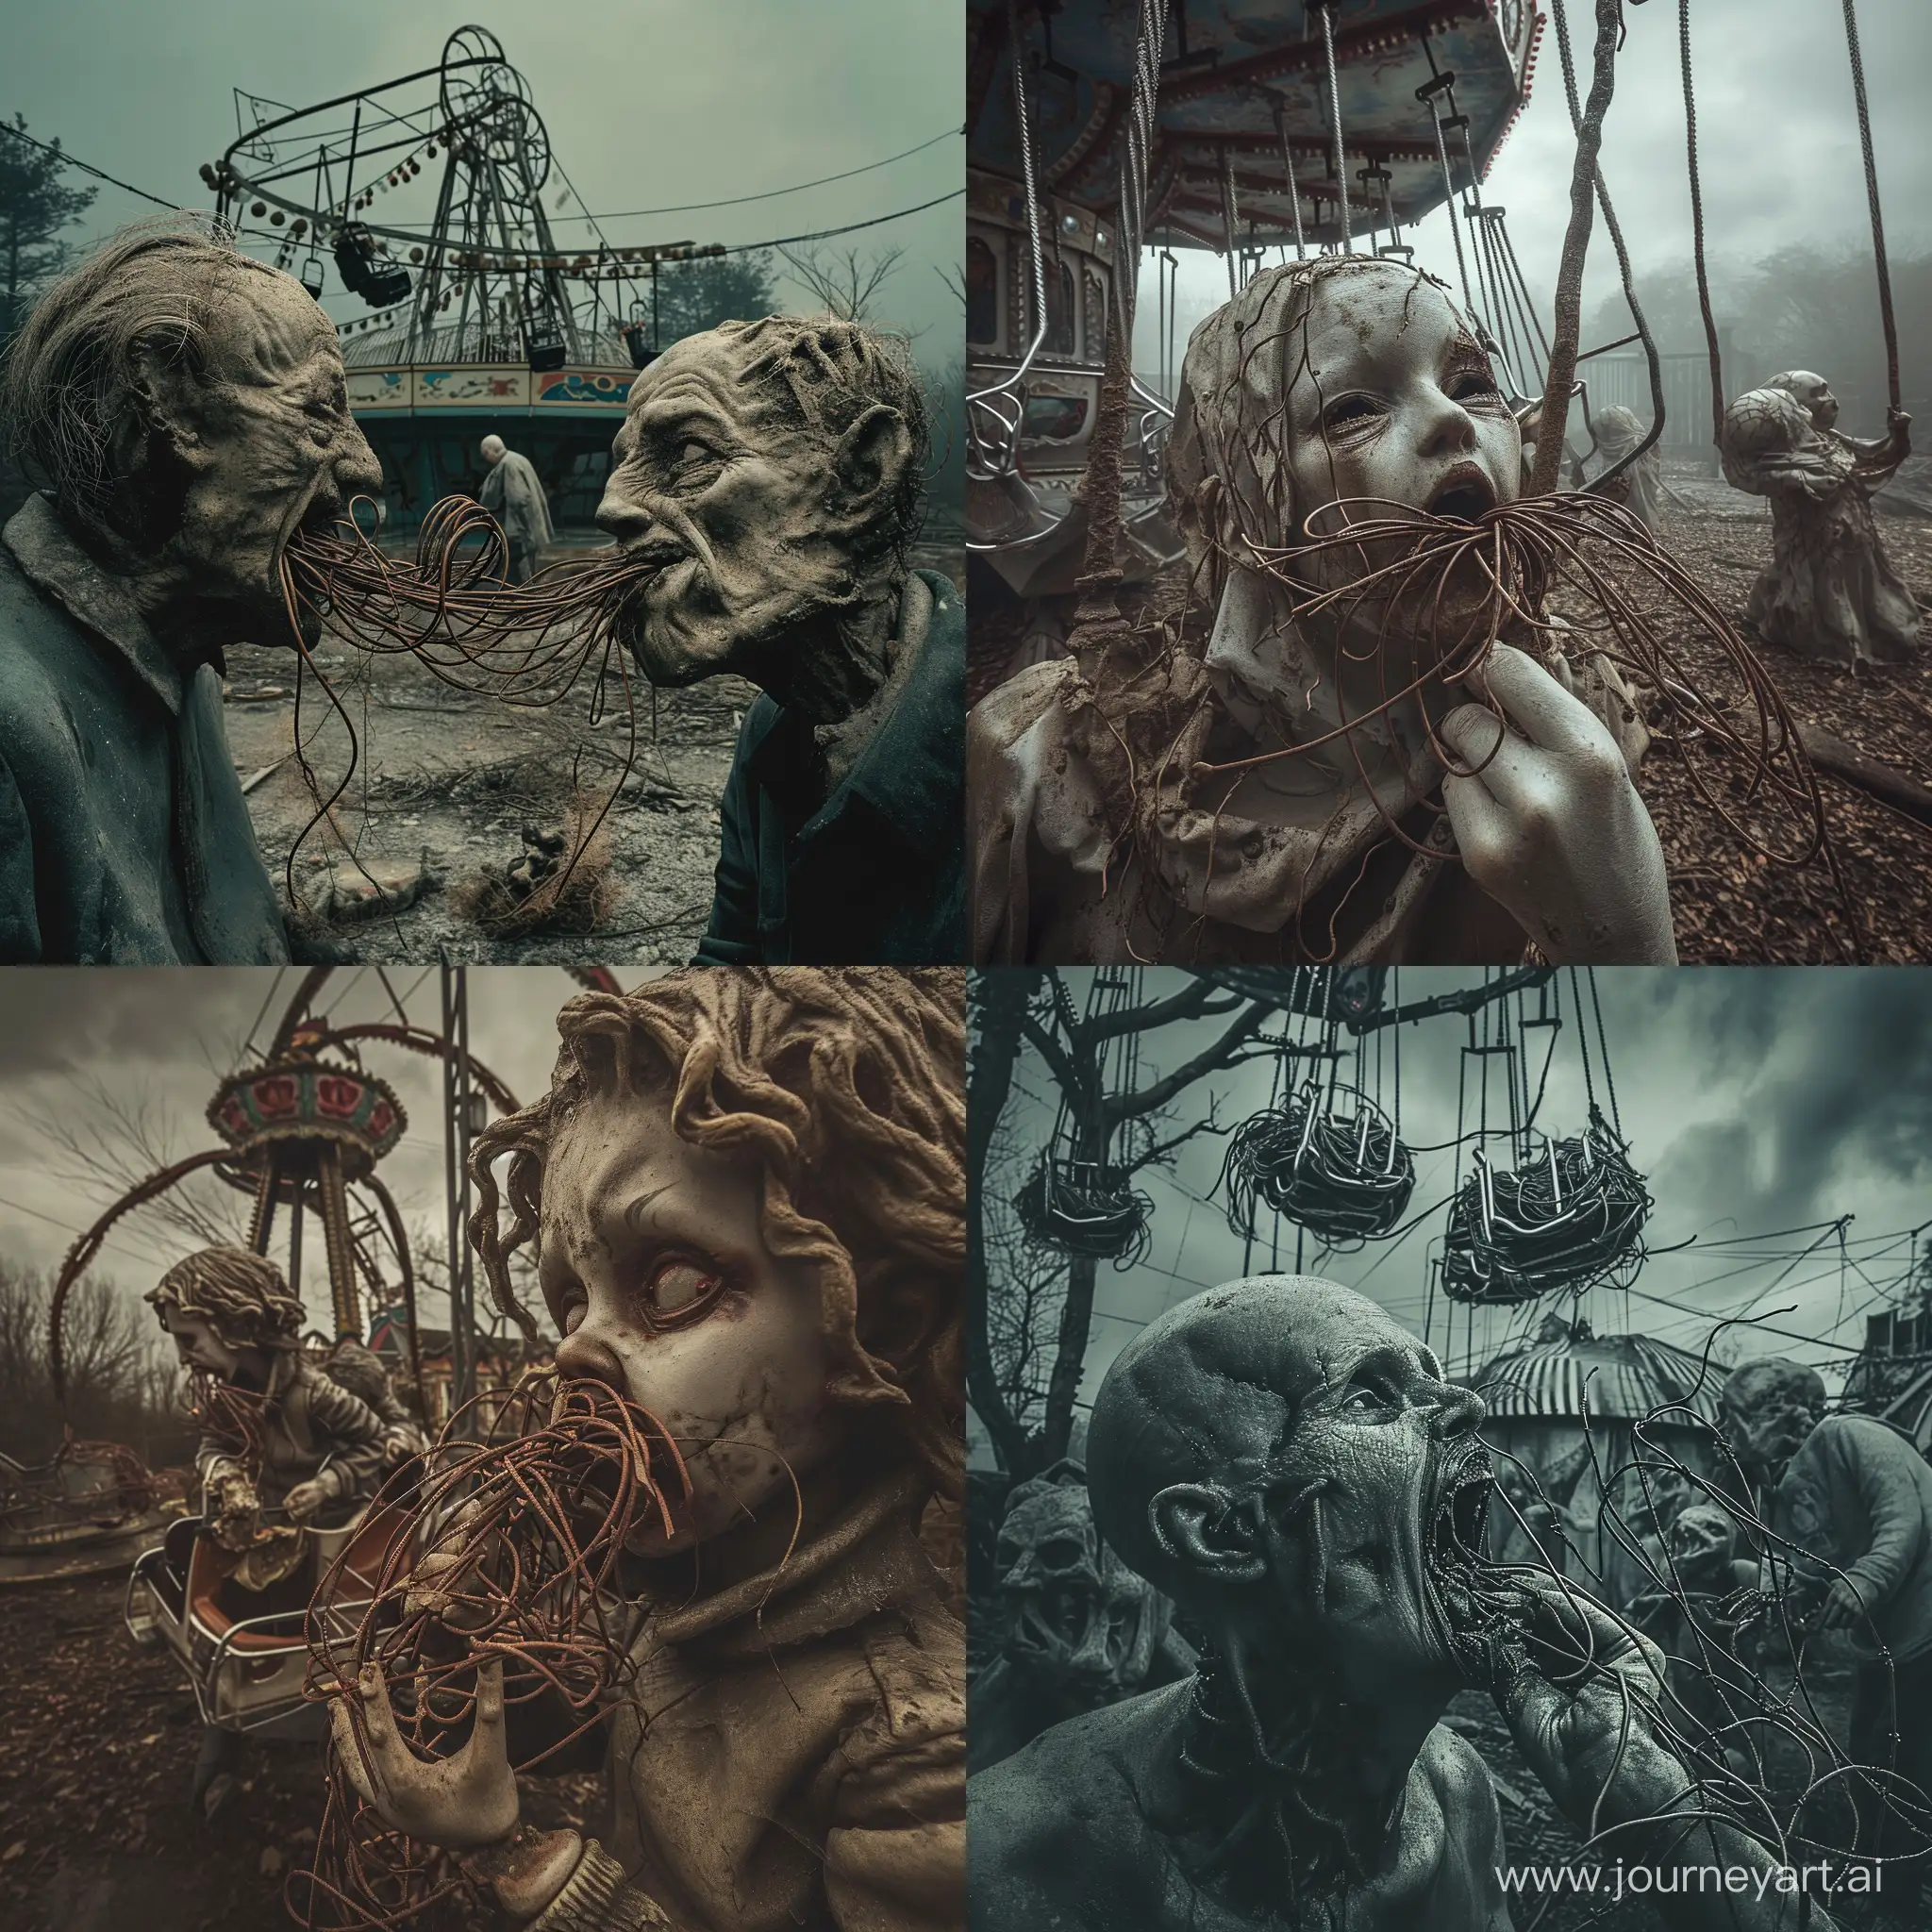 Decrepit-Amusement-Park-with-Haunting-Figures-and-Rusted-Wires